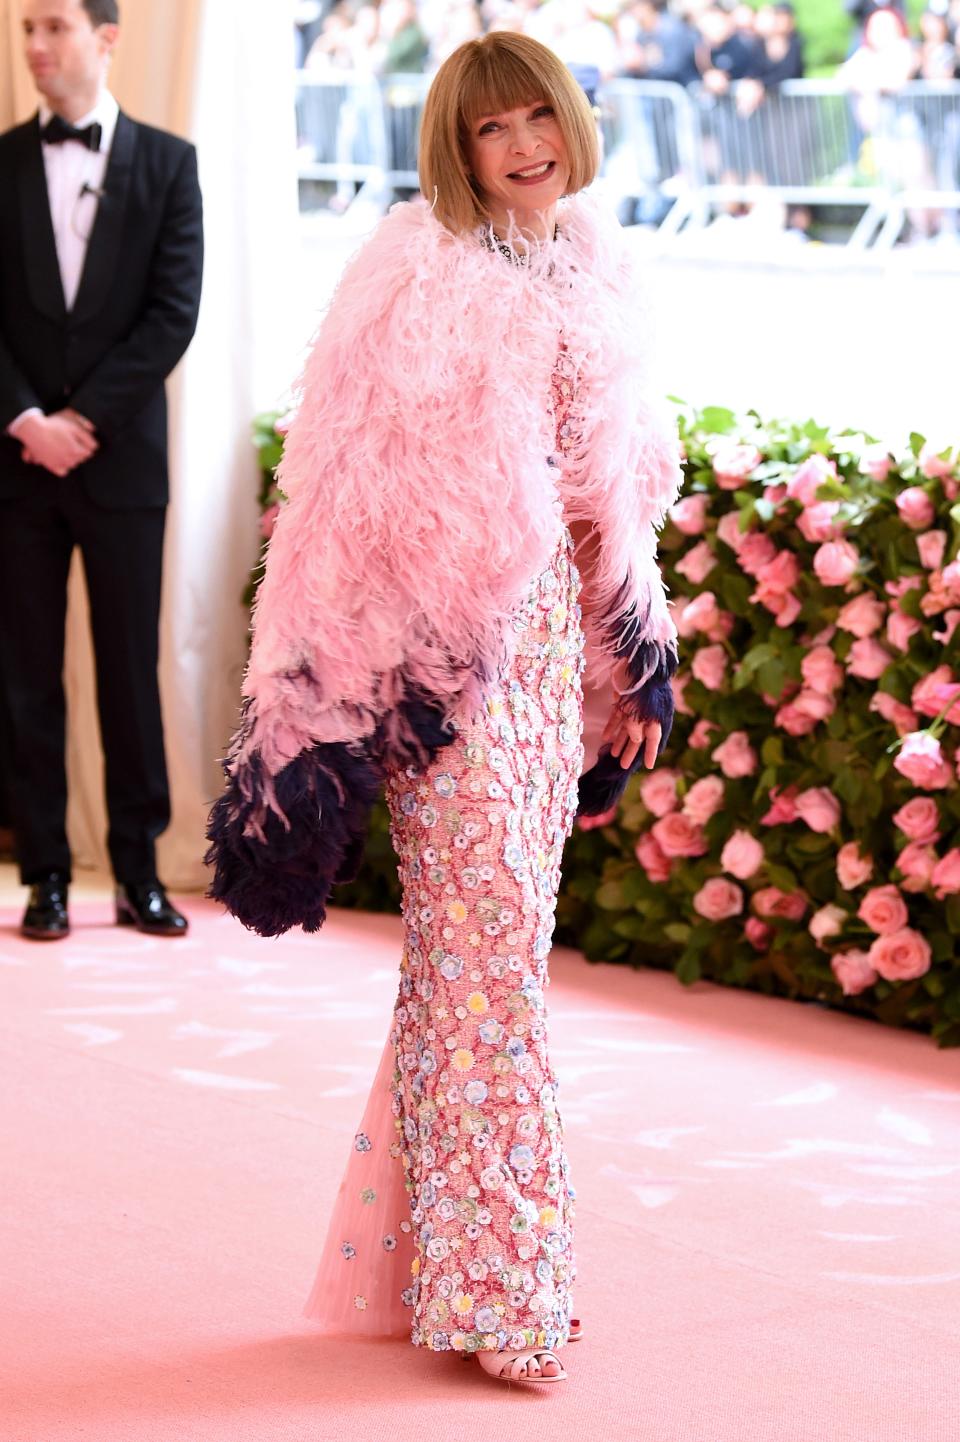 Anna Wintour at the 2019 Met Gala, the theme of which was "Celebrating Camp: Notes on Fashion."